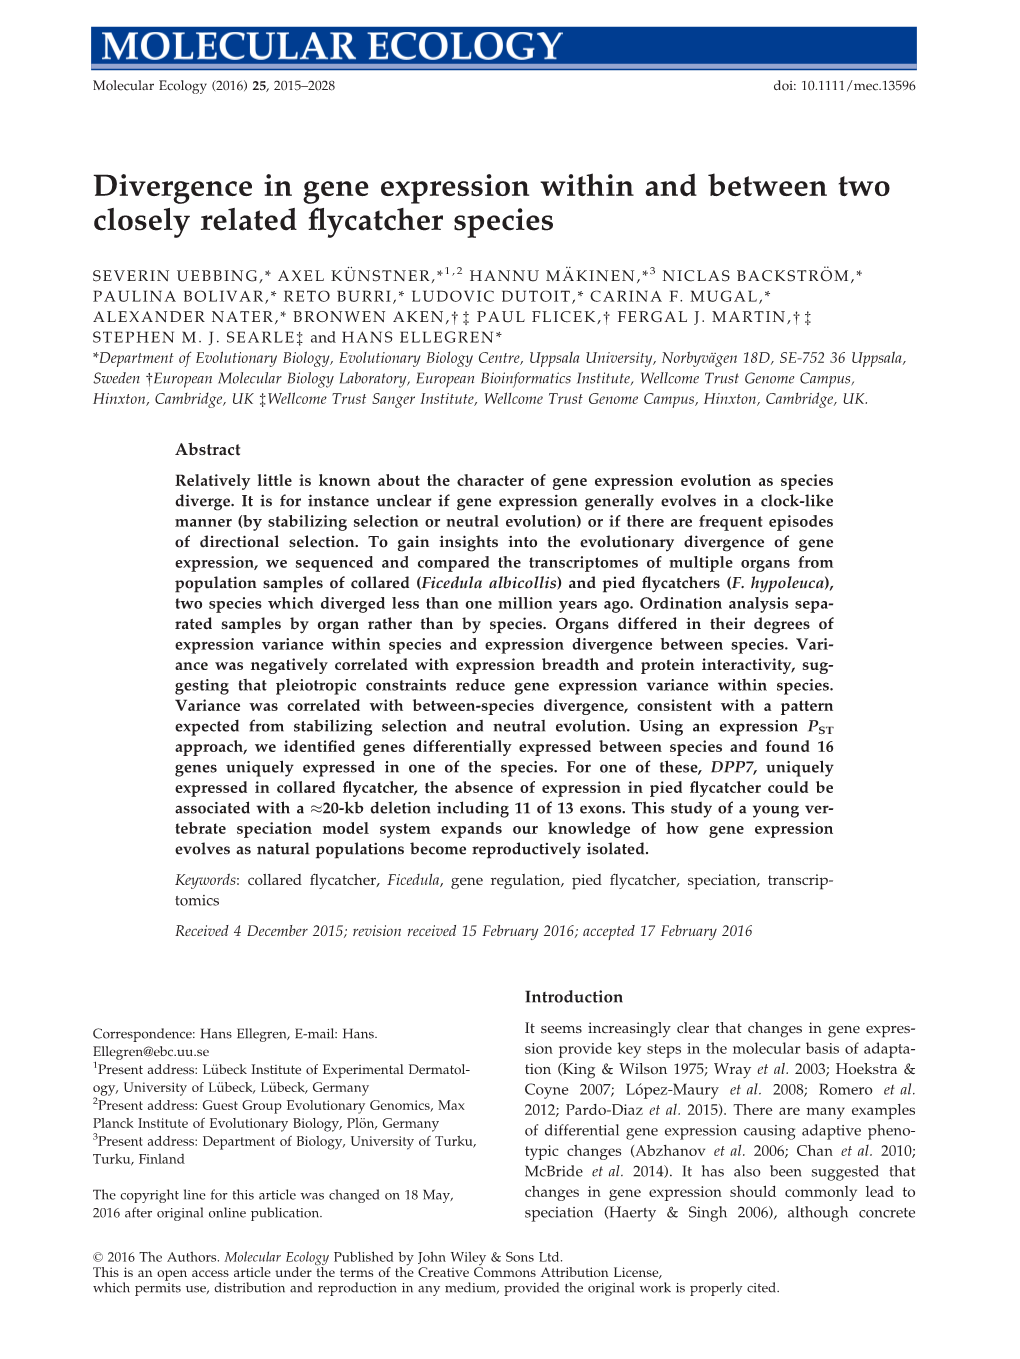 Divergence in Gene Expression Within and Between Two Closely Related ﬂycatcher Species